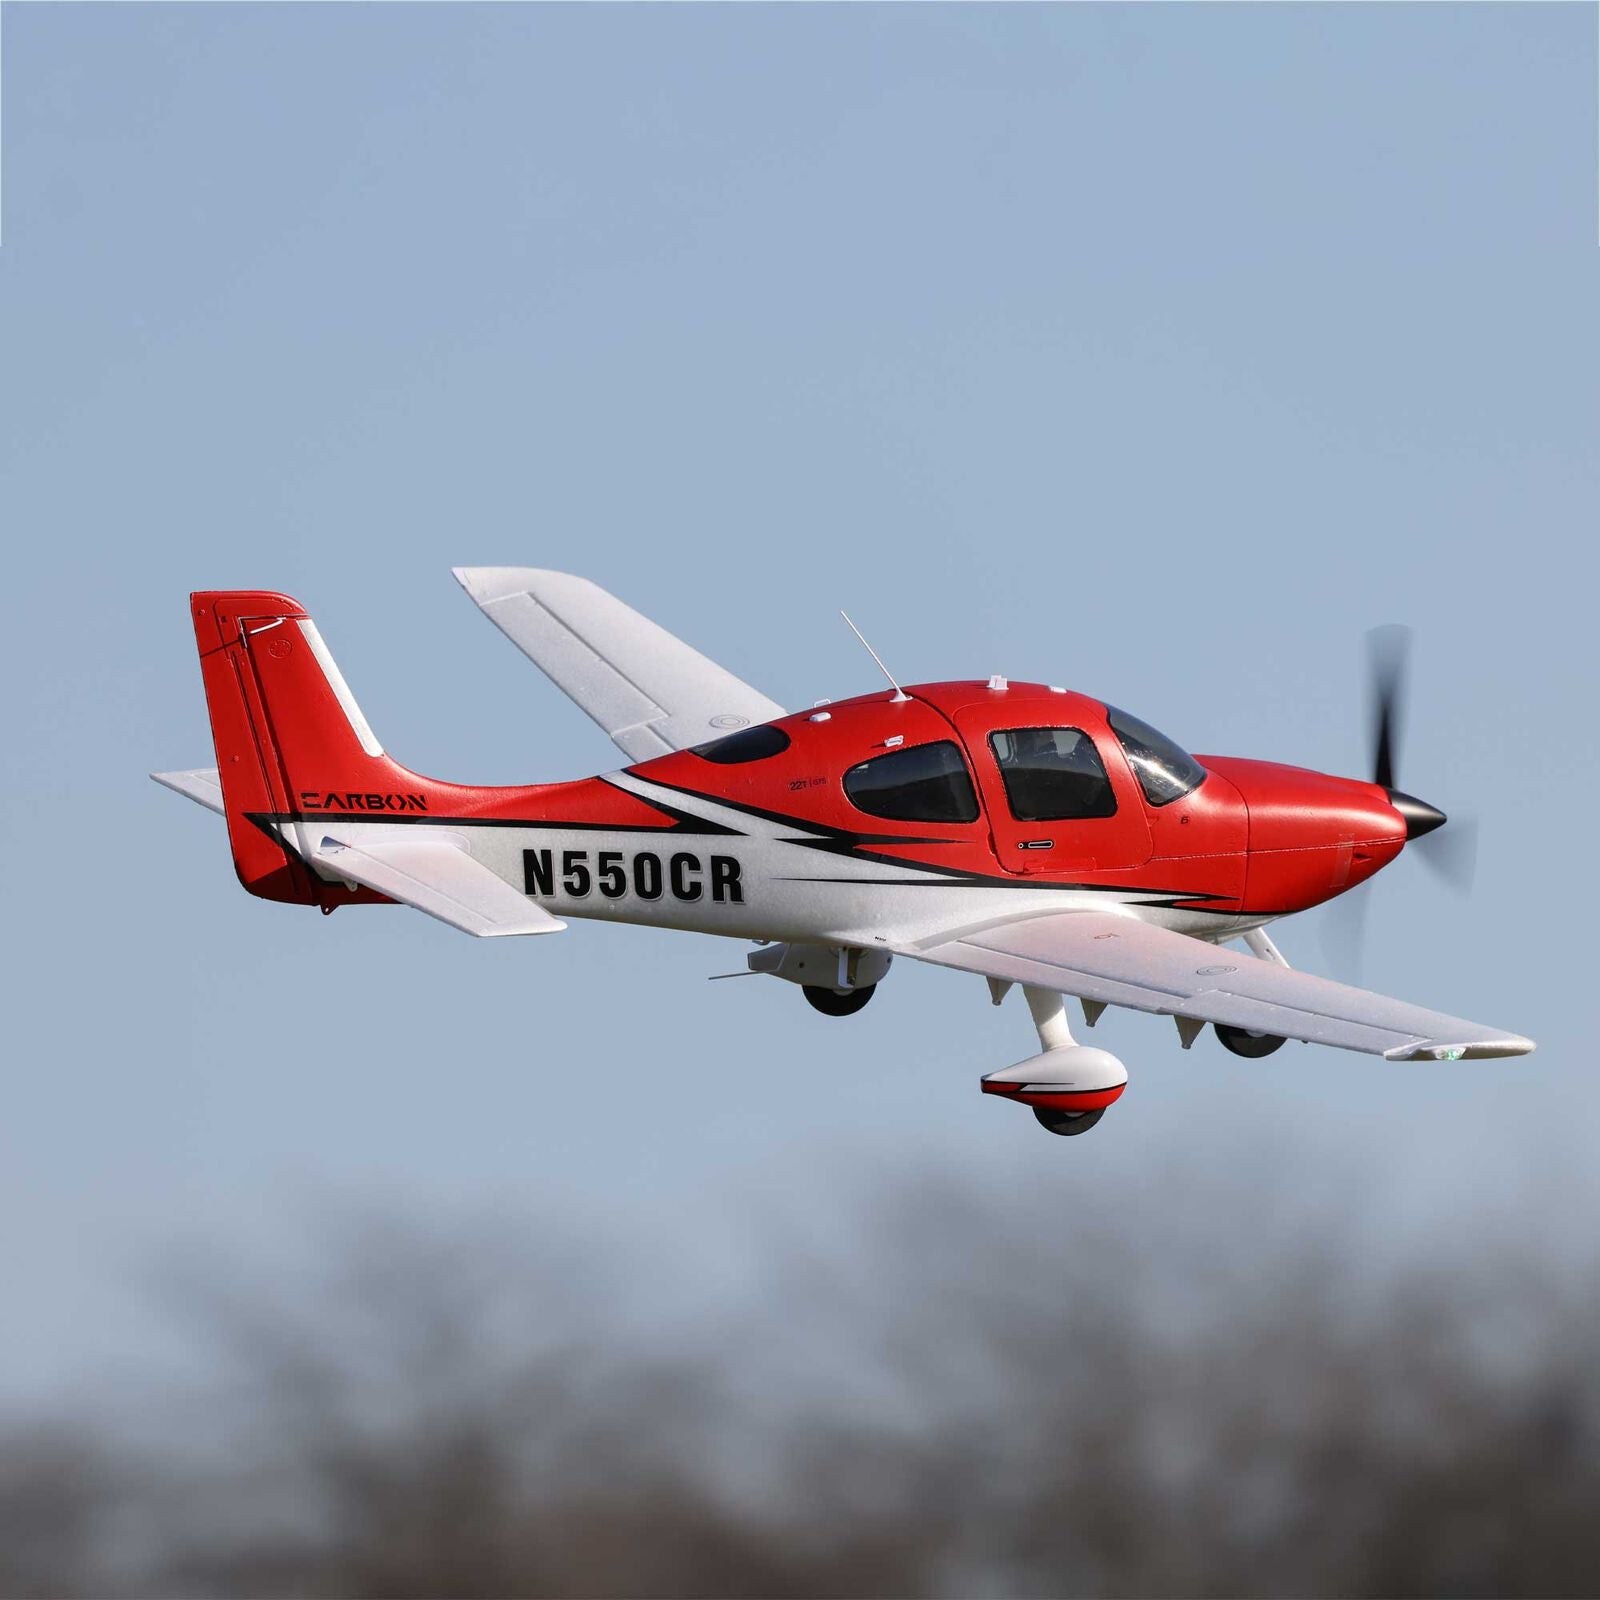 E-flite Cirrus SR22T 1.5m BNF Basic with Smart, AS3X and SAFE Select - EFL15950